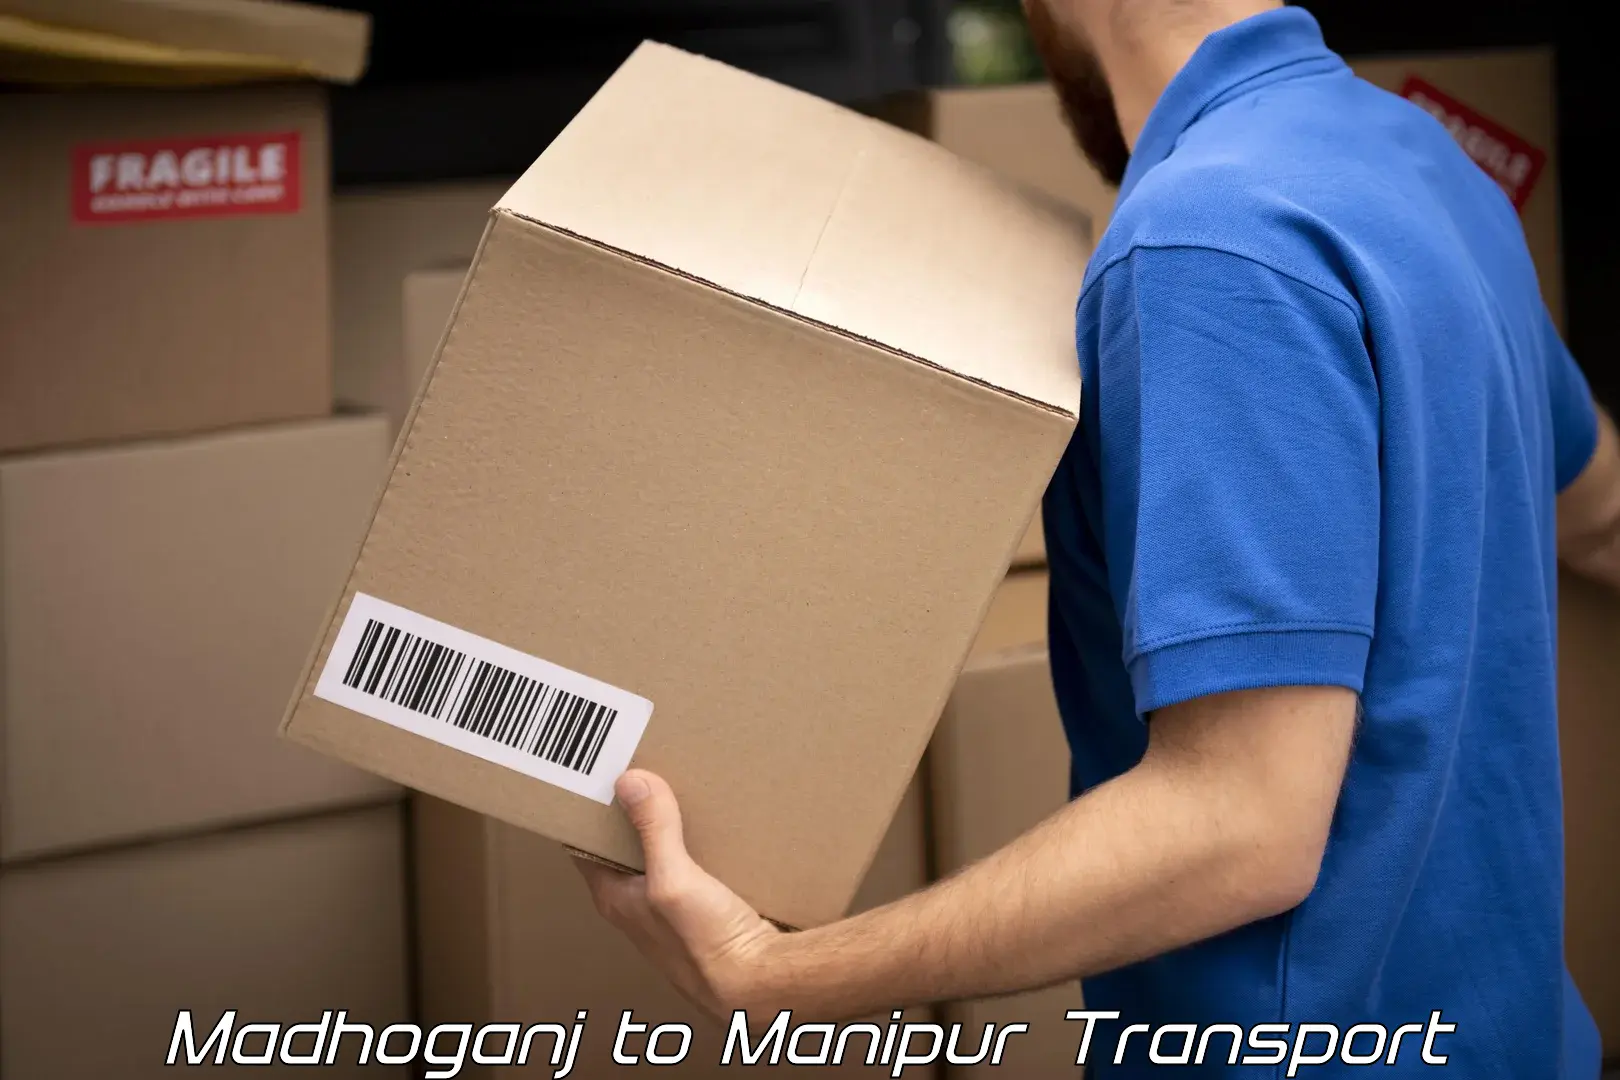 Air cargo transport services in Madhoganj to Kakching